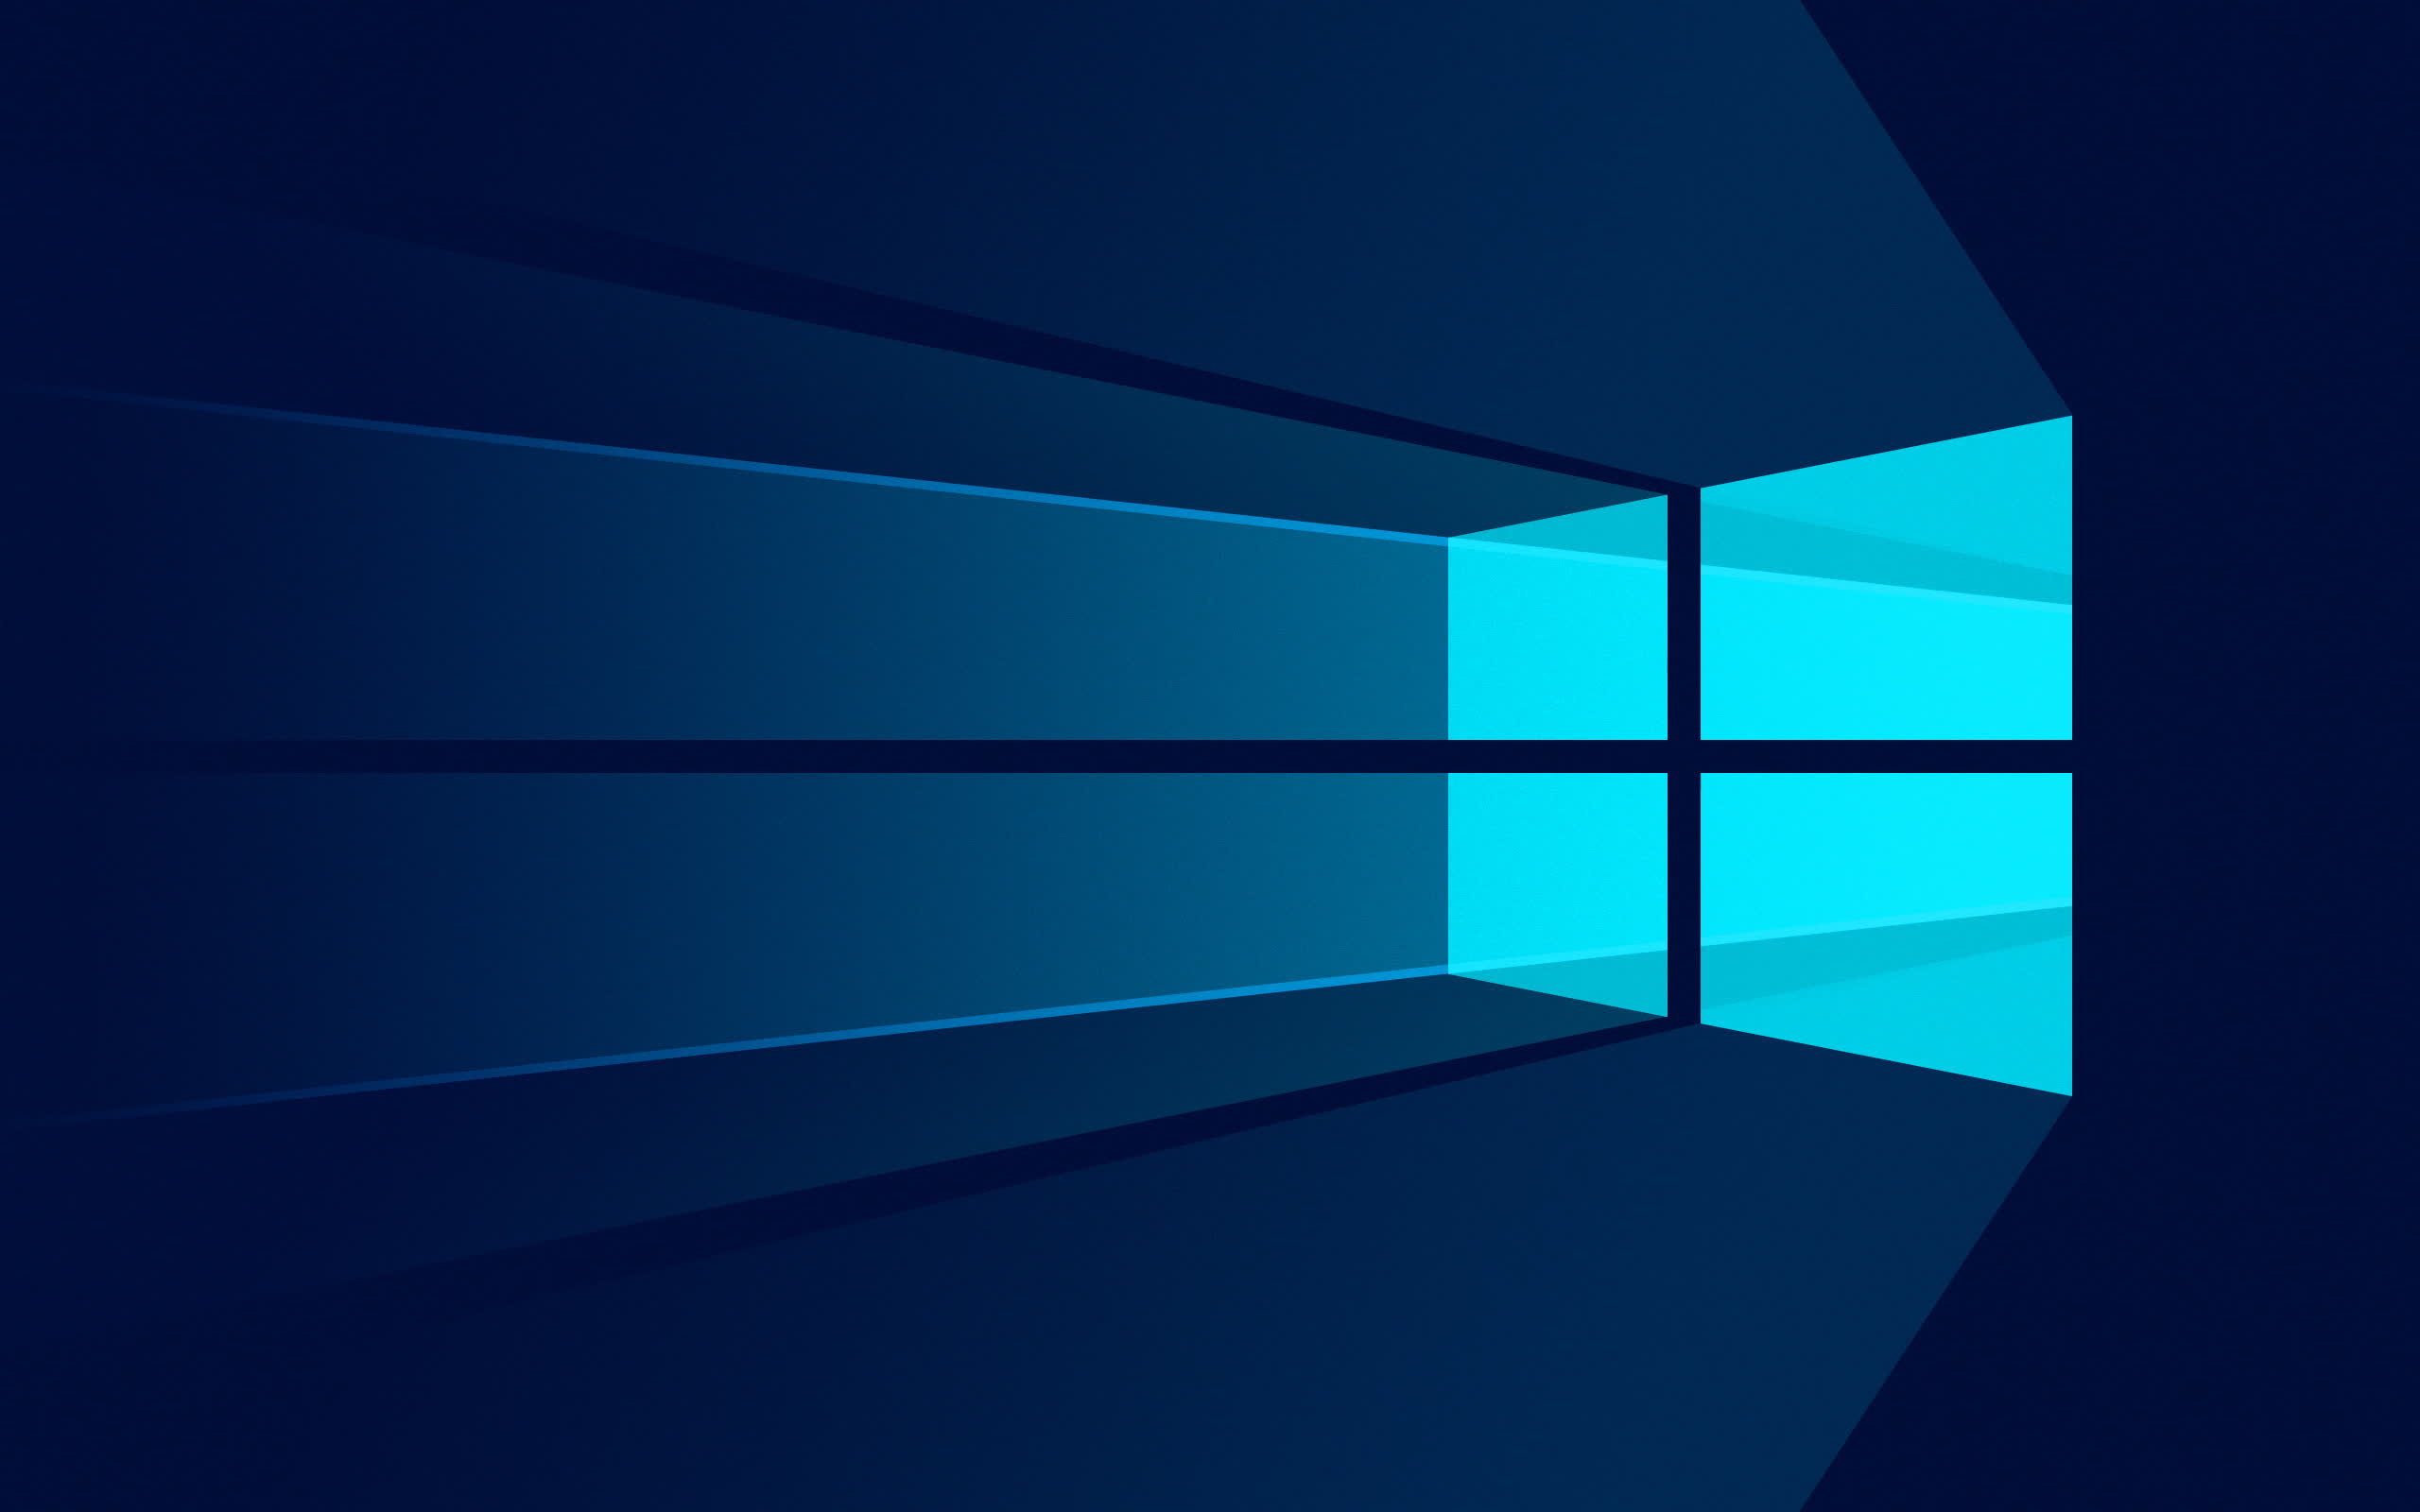 Windows 12 rumored to arrive in fall 2024 with a floating taskbar and a focus on AI